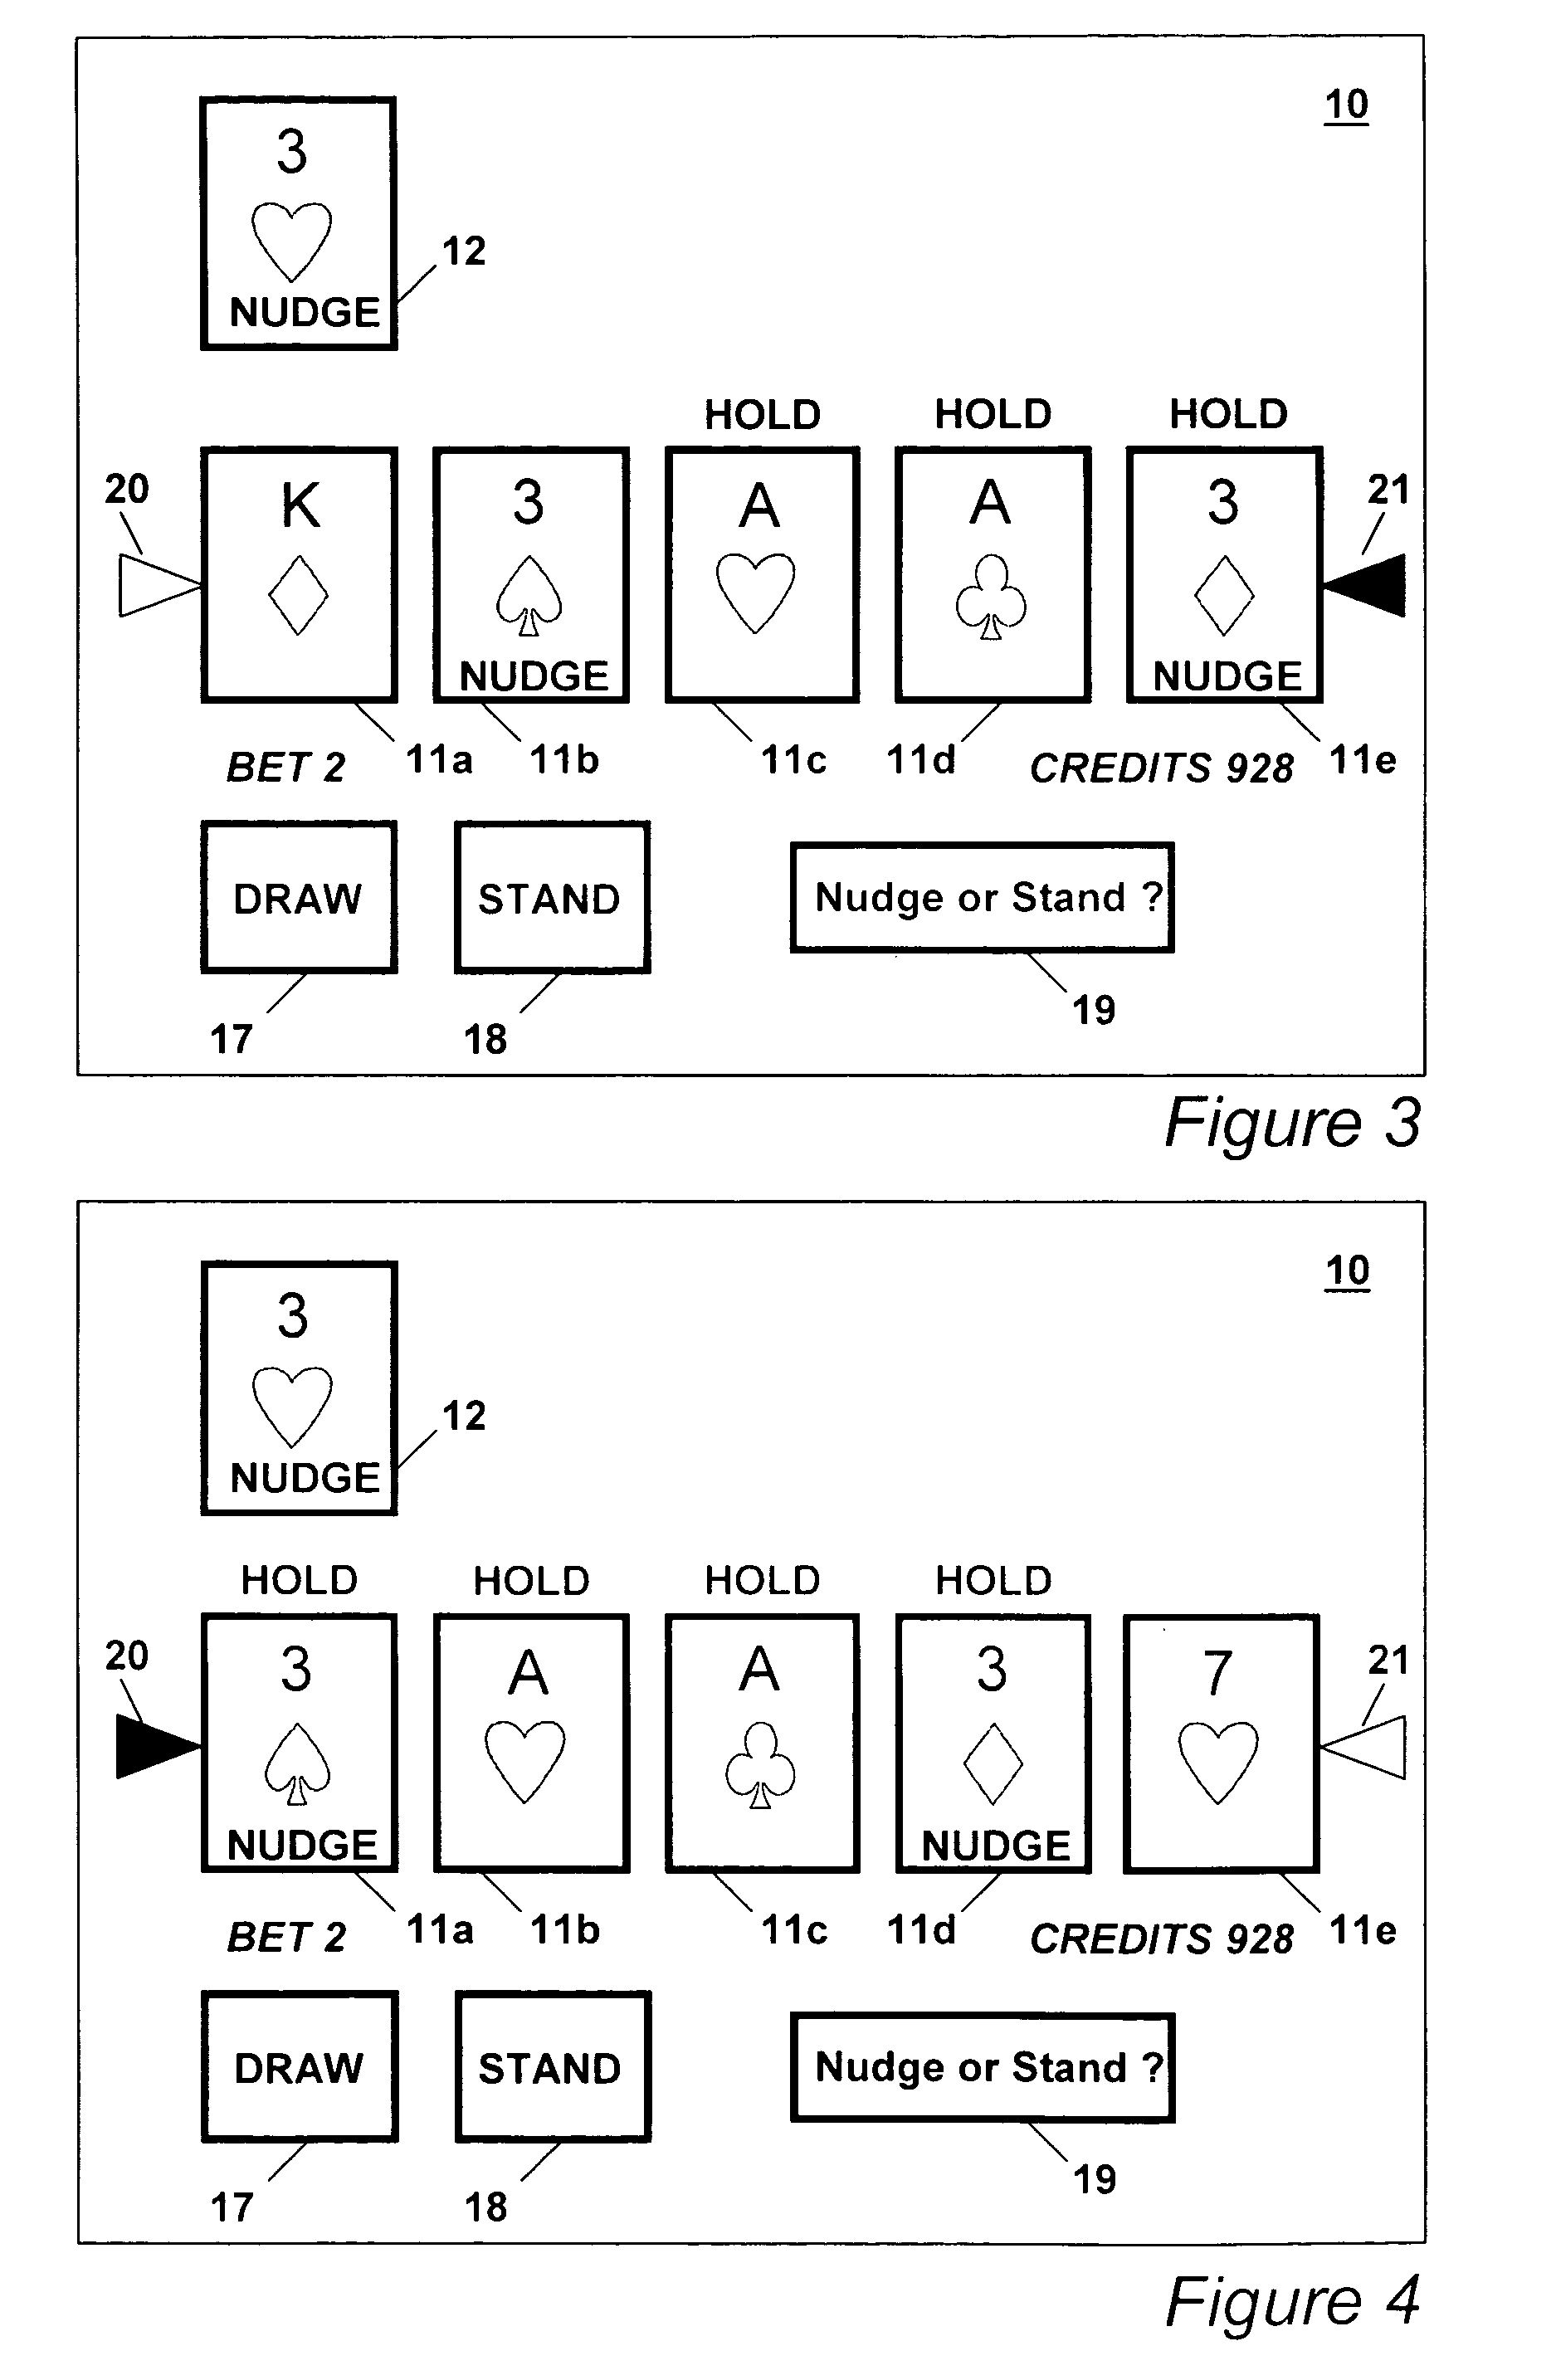 Method for playing poker with additional card draws